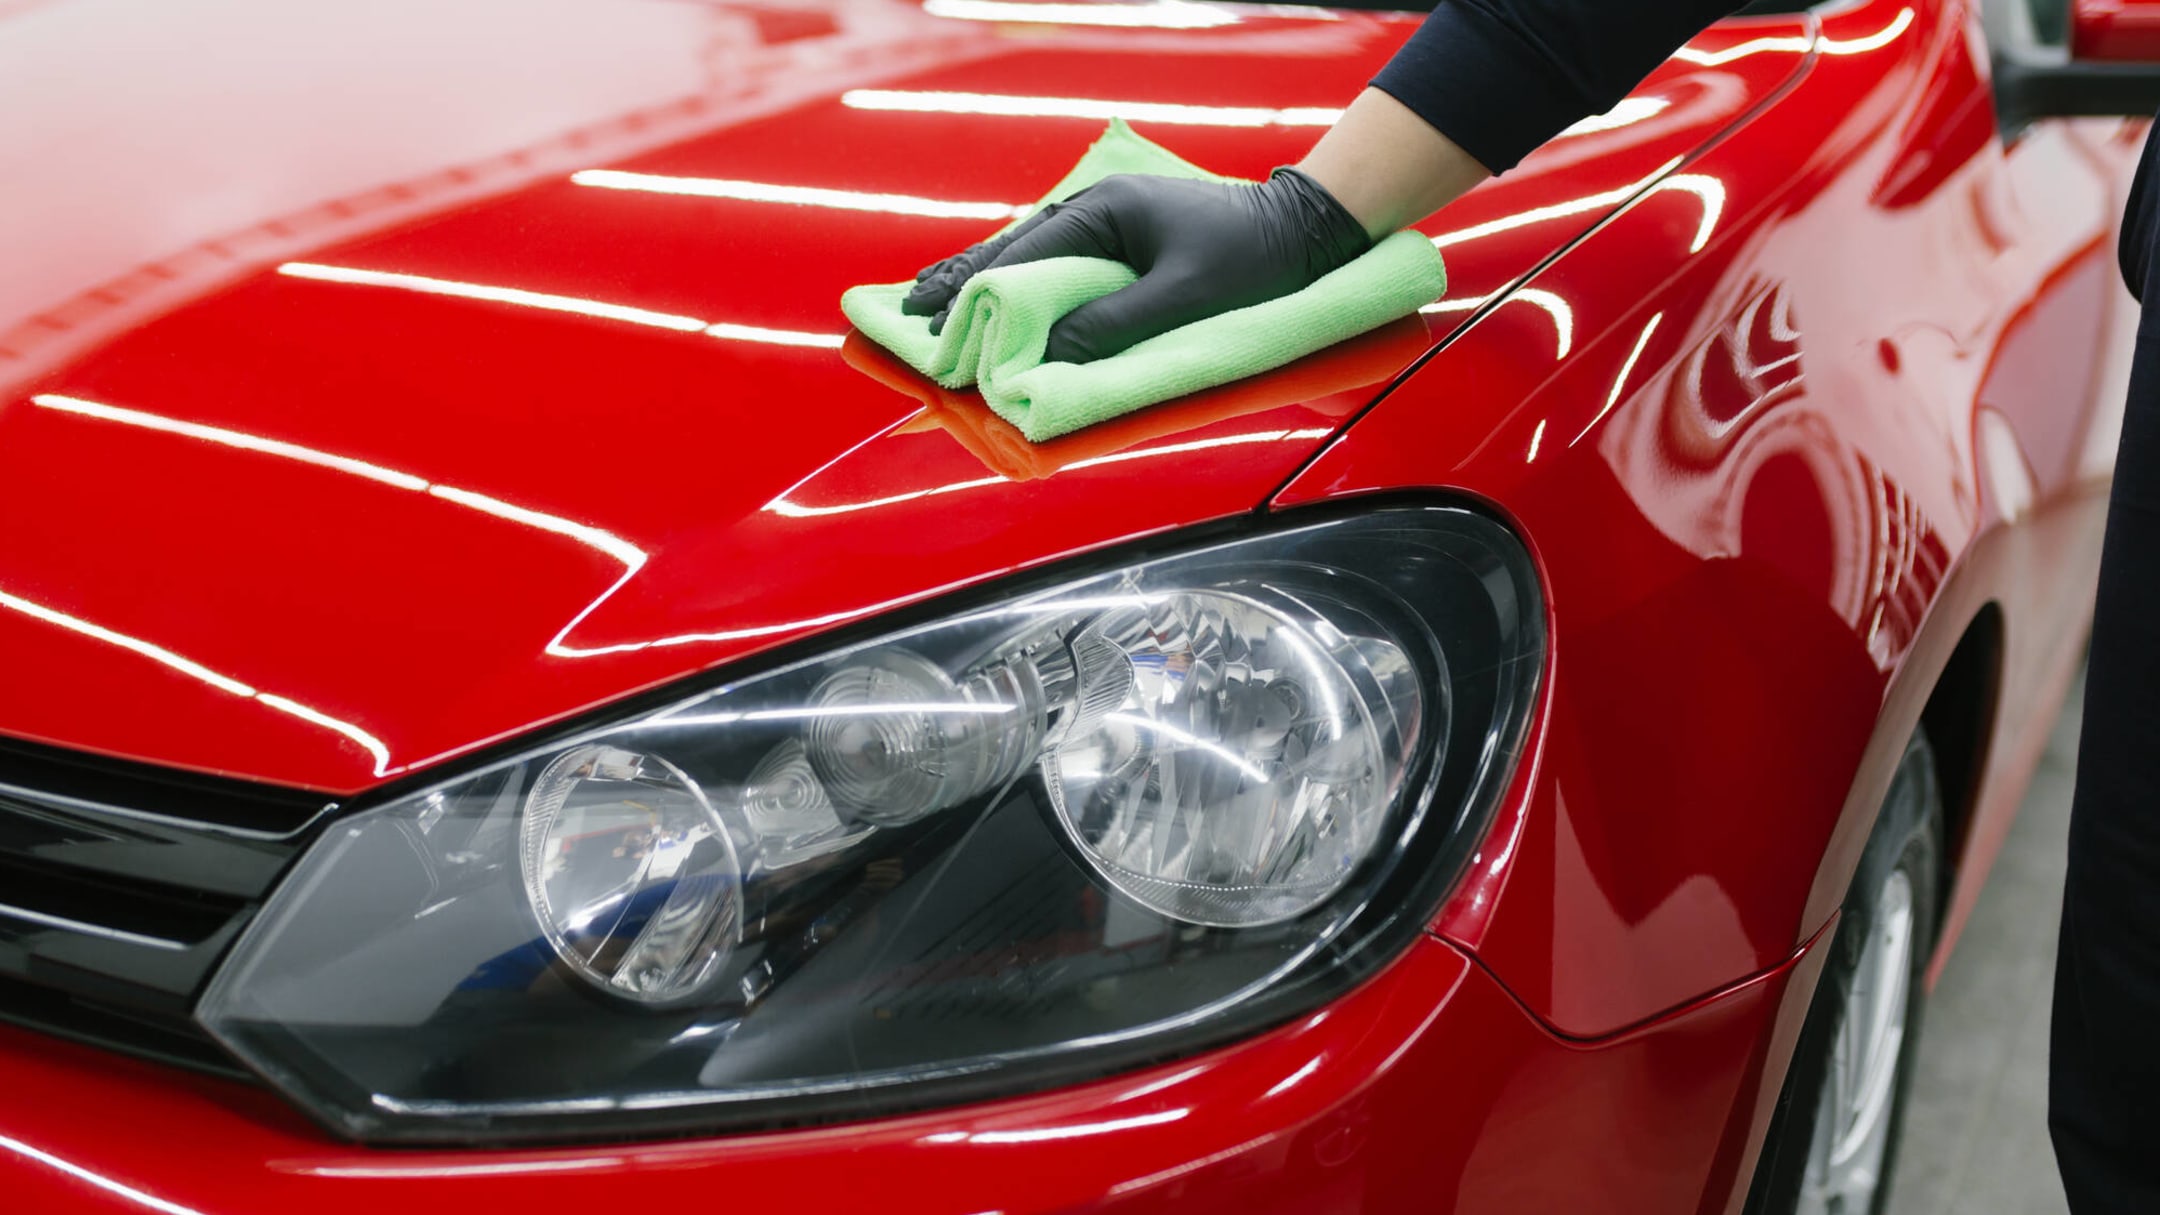 5 Best Tips To Keep Your Car Clean – Involve Your Senses